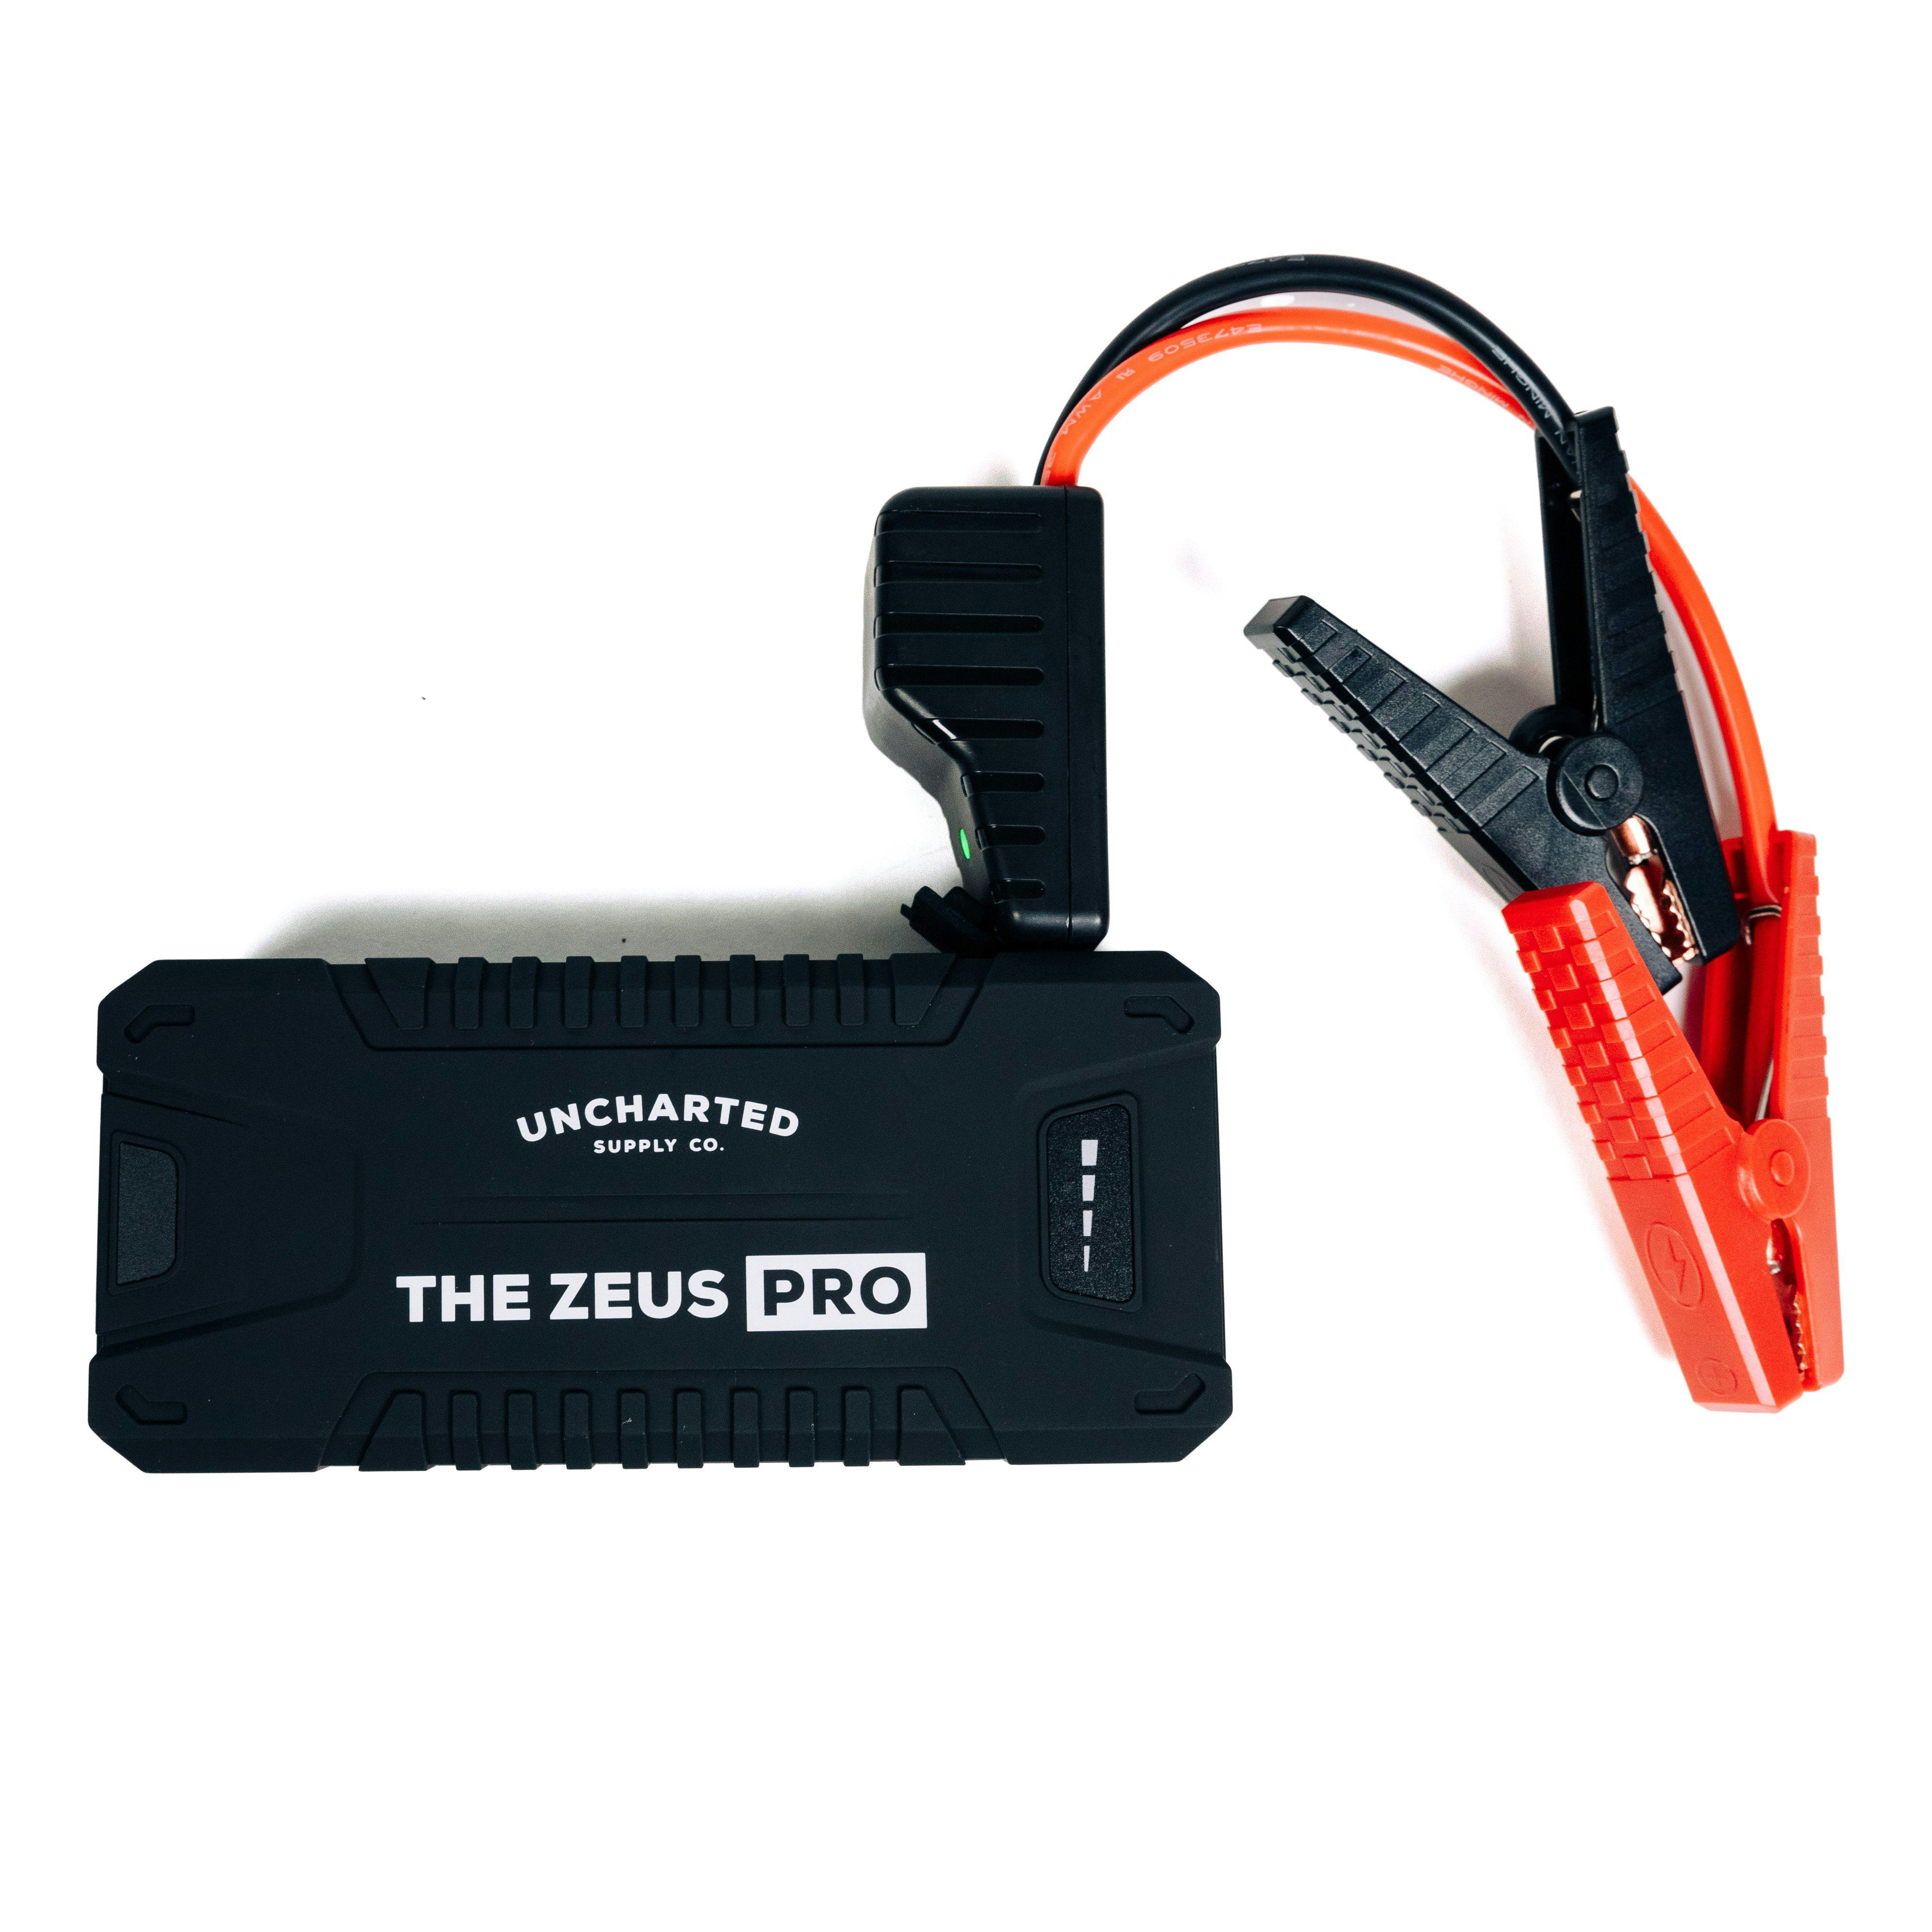 Zeus Pro - Portable Jump Starter and Power Bank